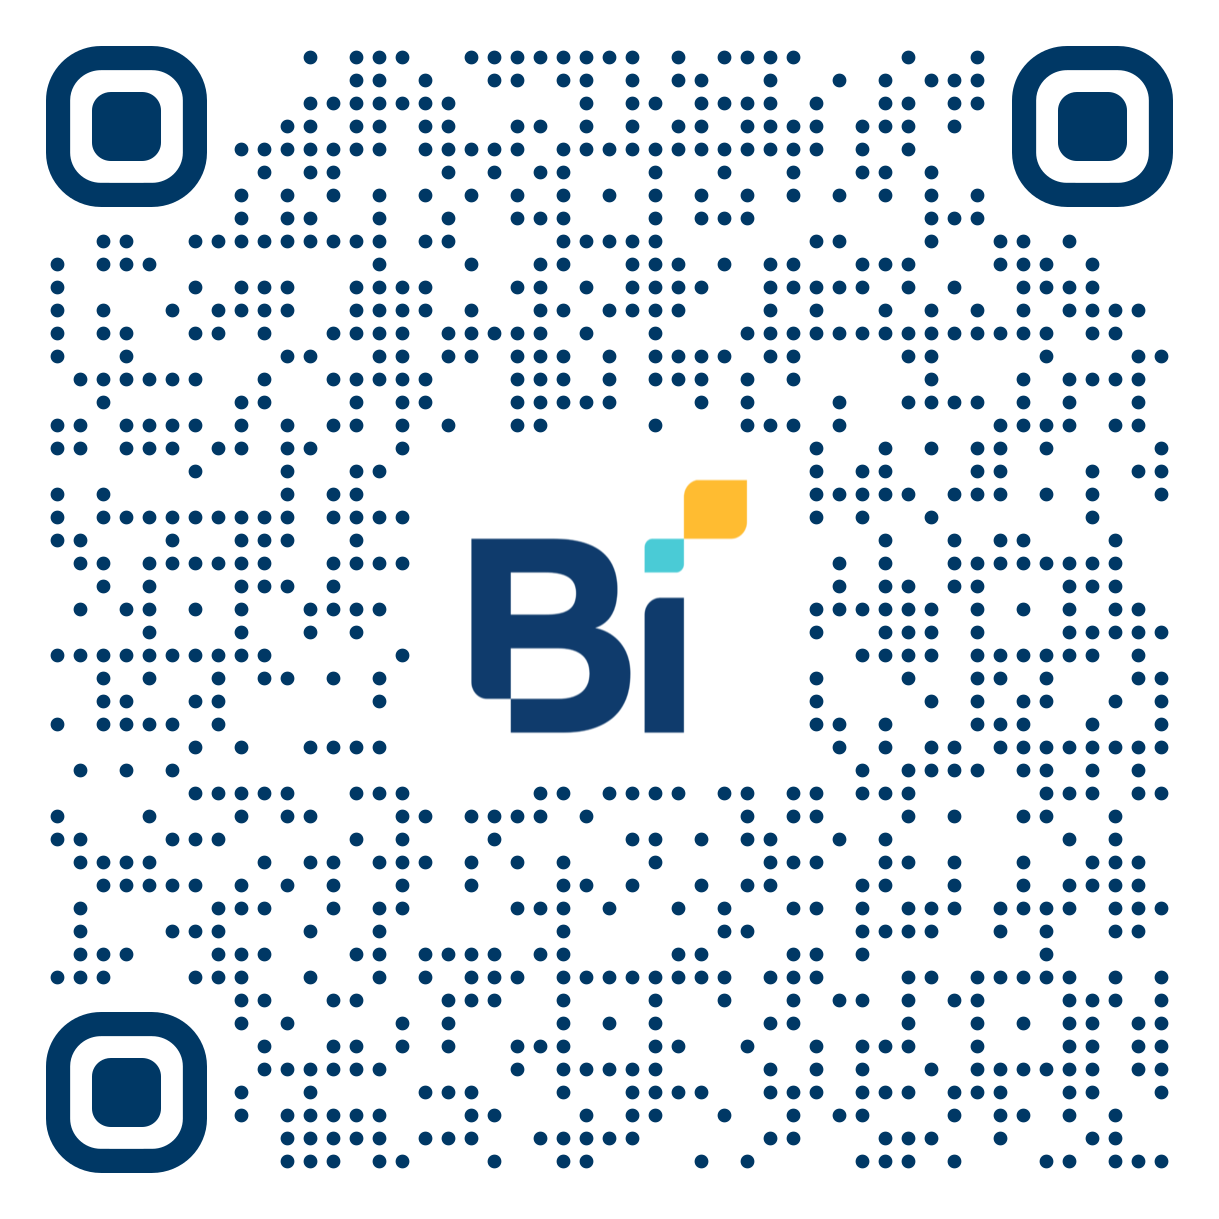 QR code for scanning and navigate to view on mobile